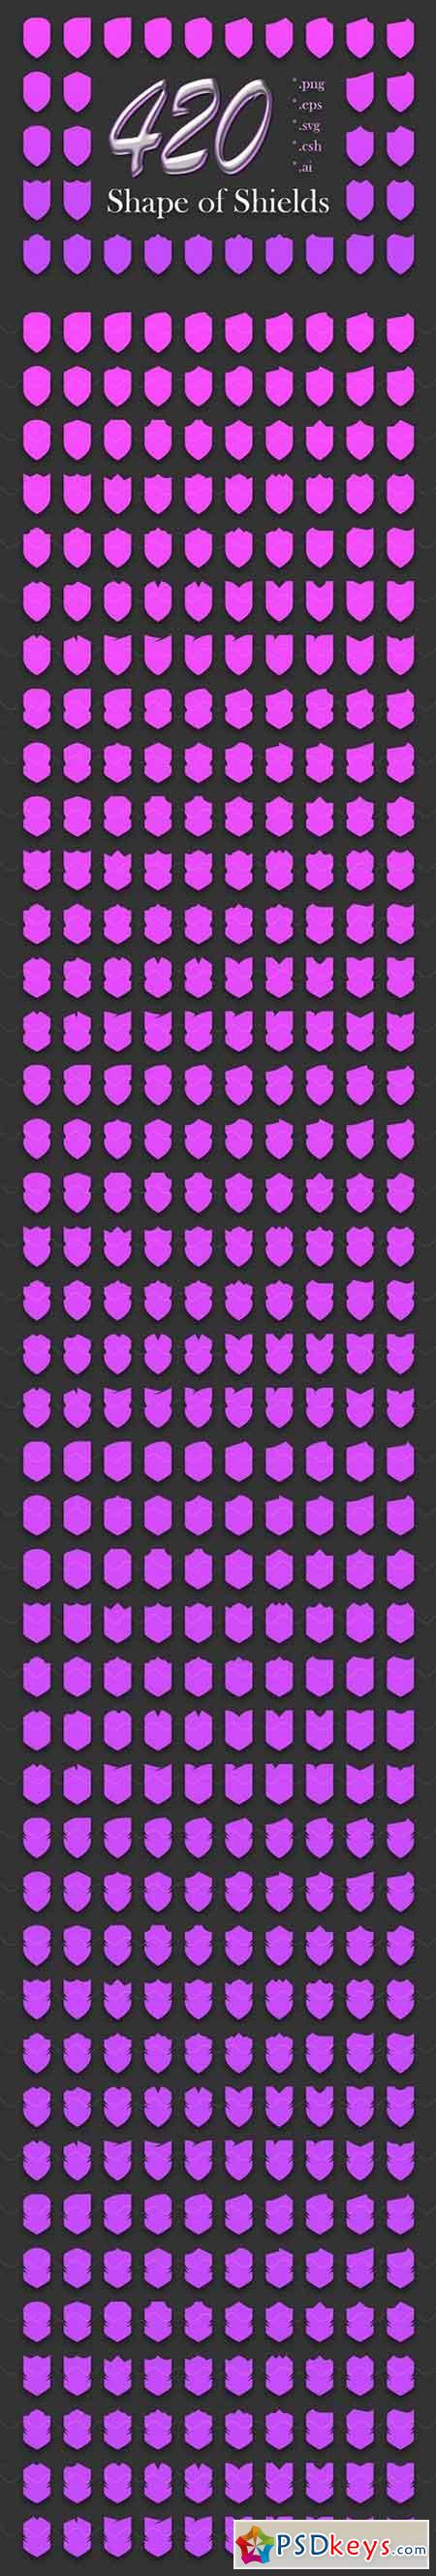 420 Shapes of Shields 1300053